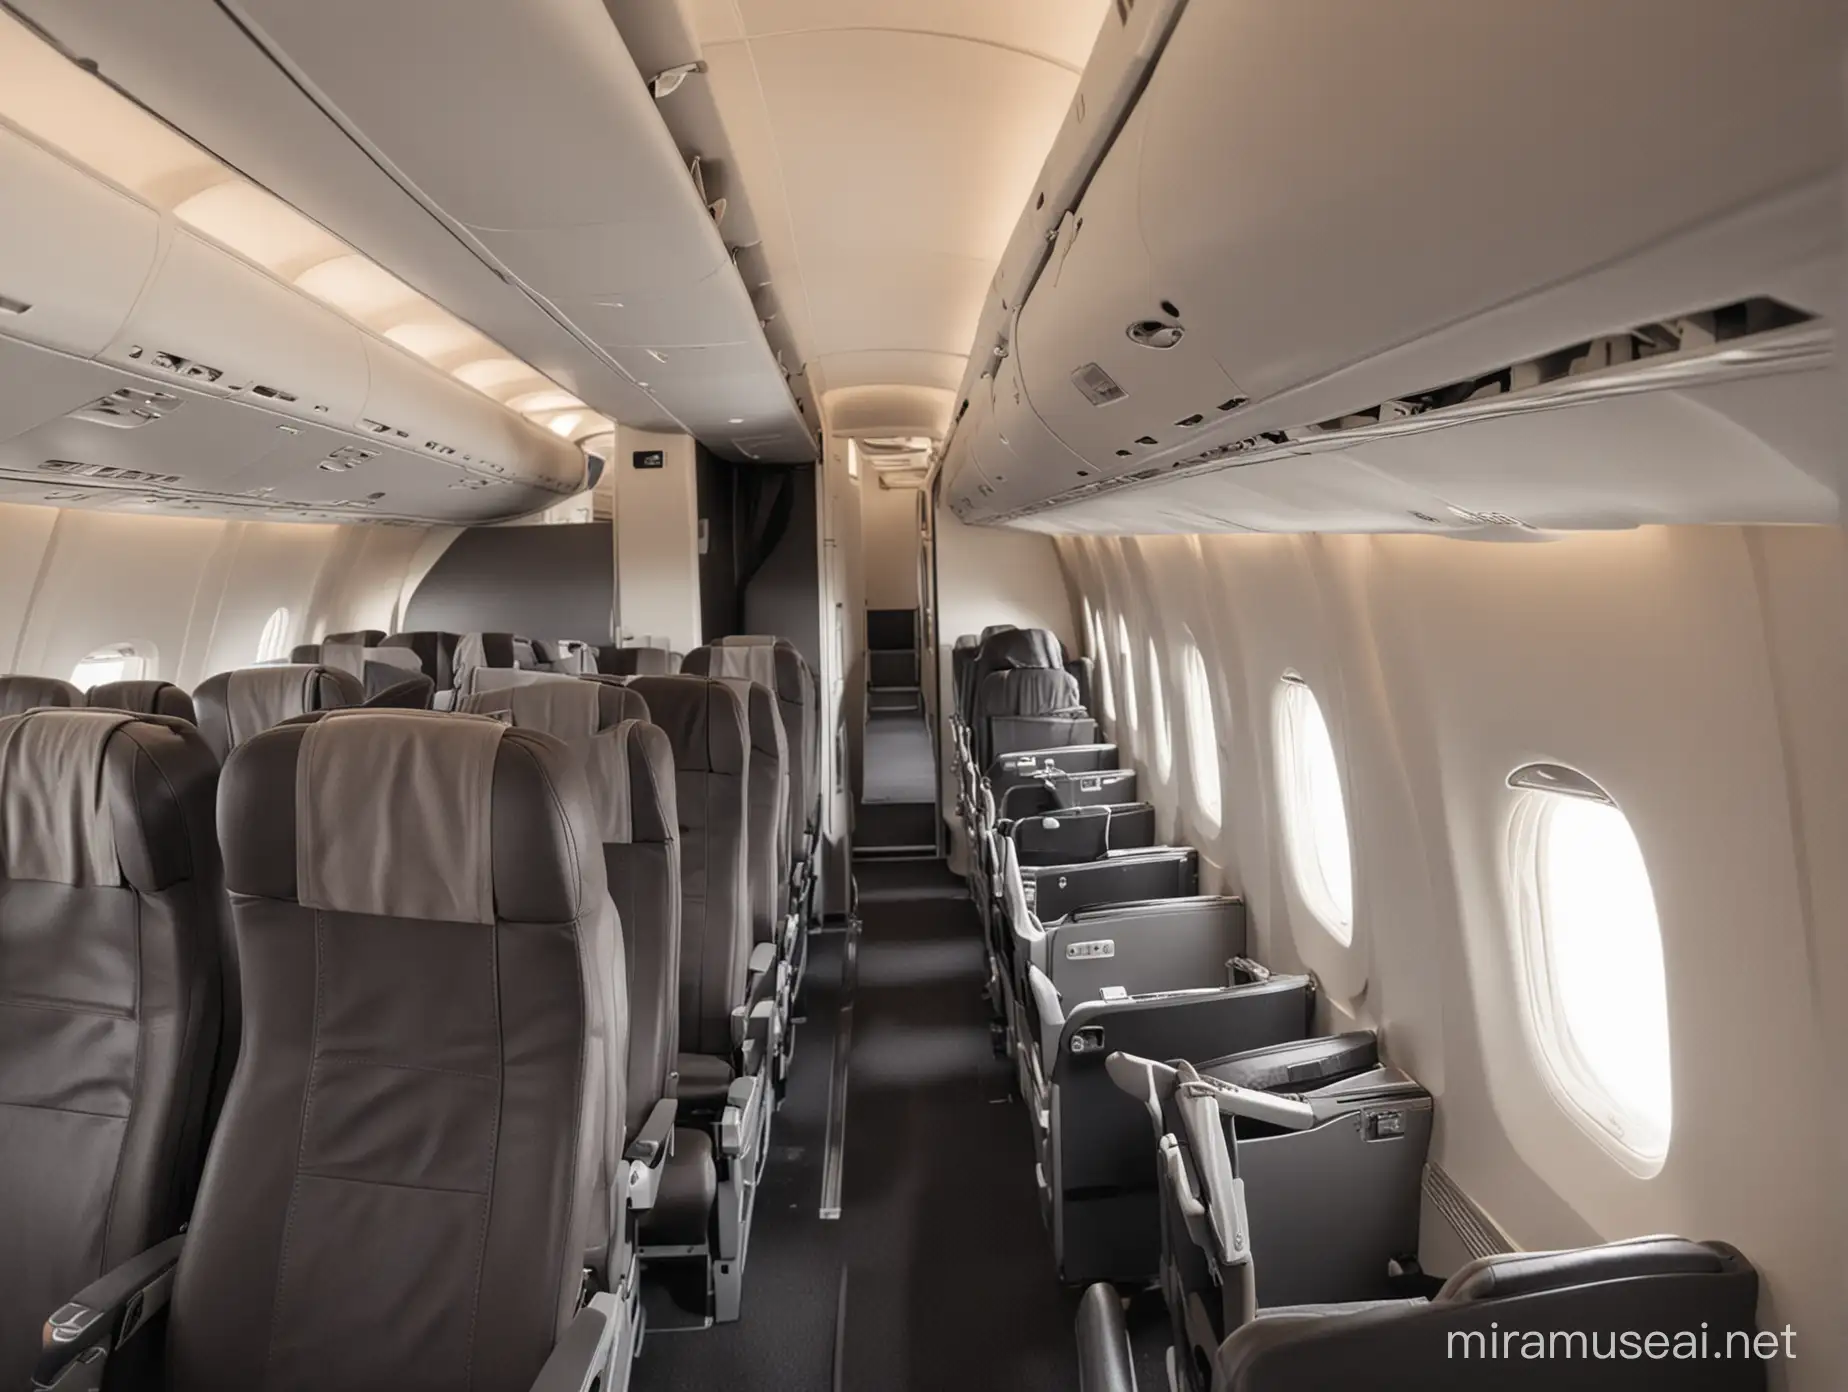 Interior of Airplane with Seats Modern Commercial Aircraft Cabin